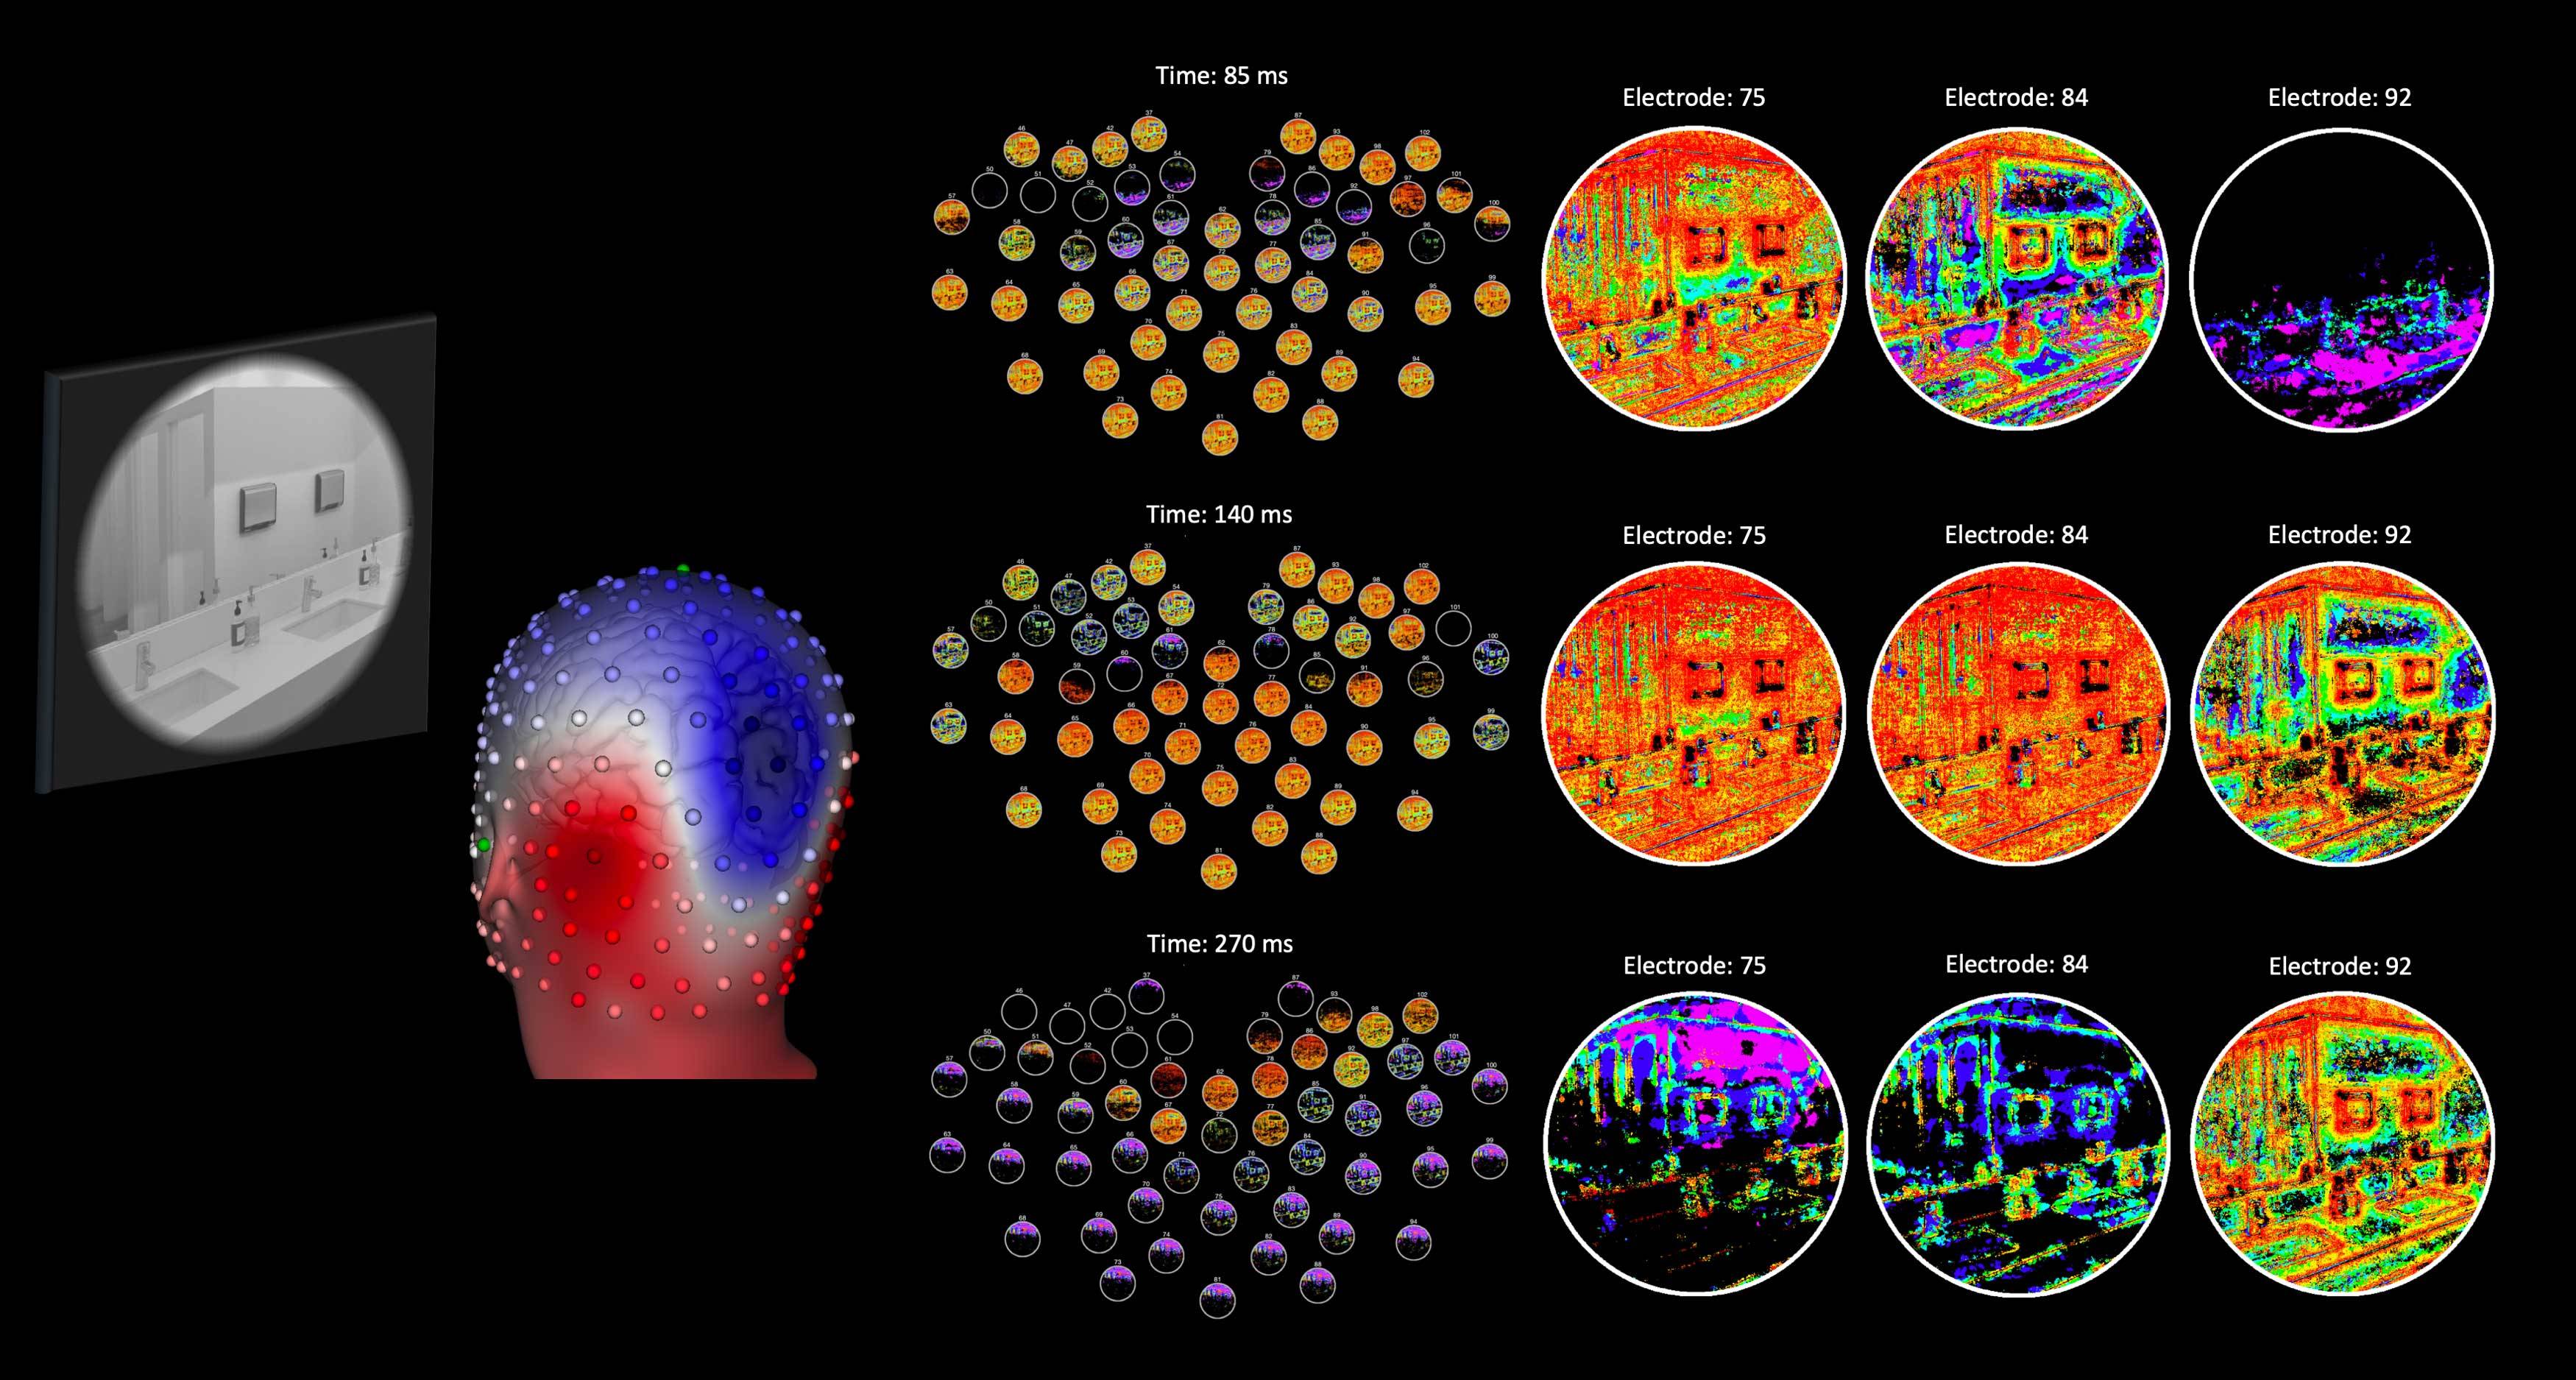 DETI mapping results from the brain of a person viewing stimuli